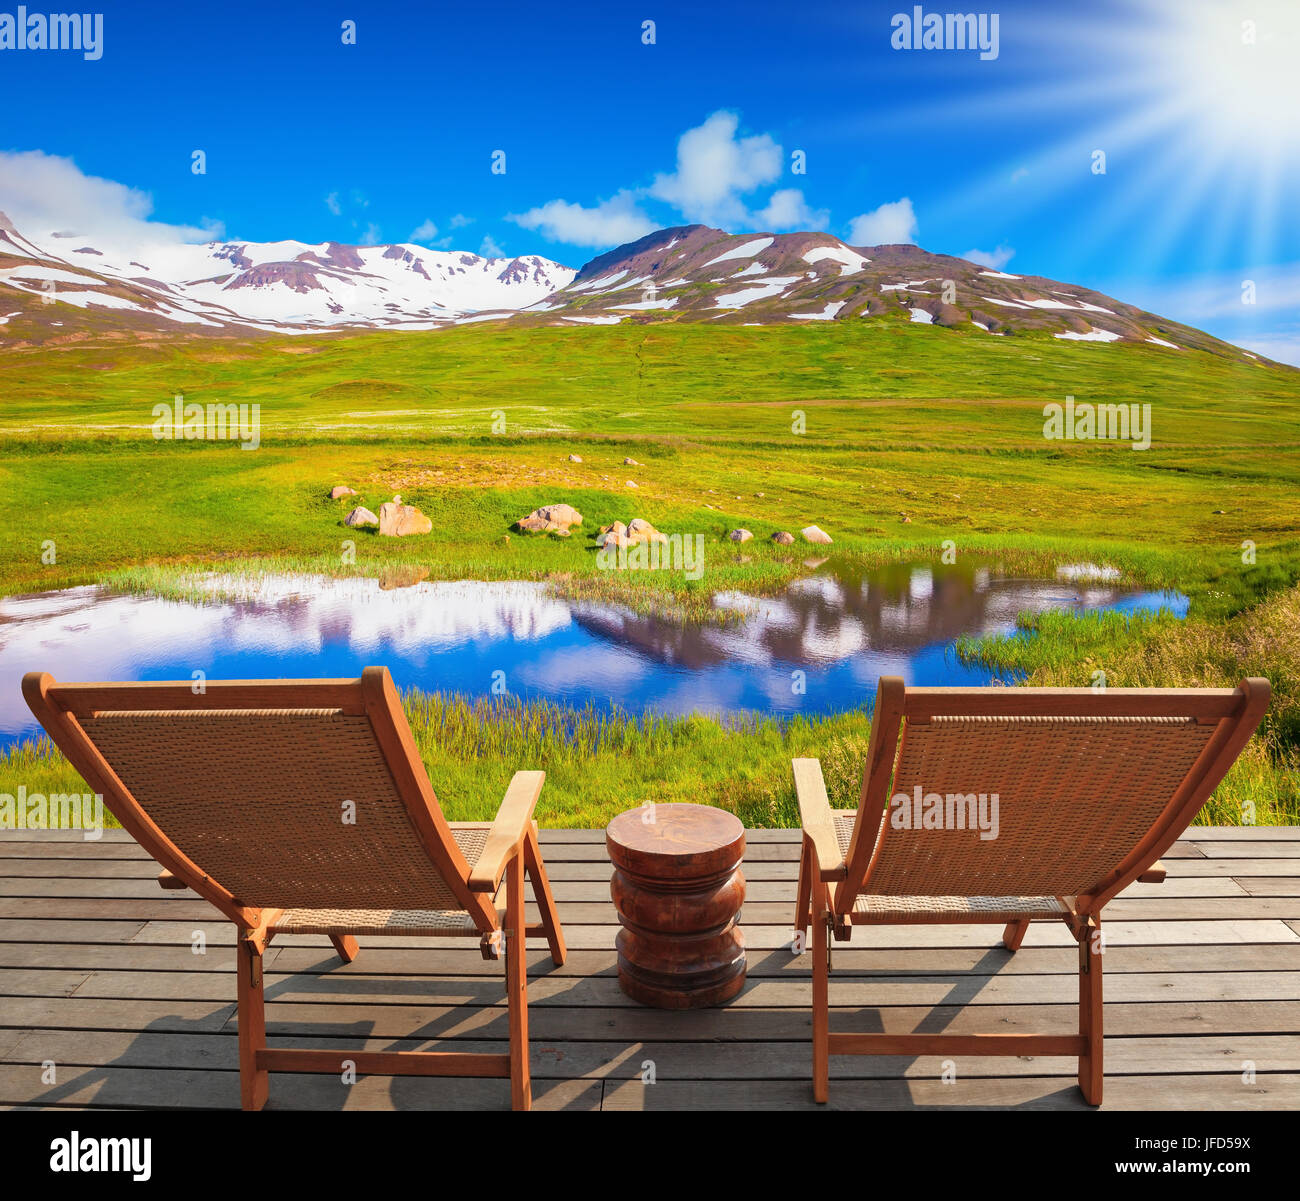 On wooden platform there are two deckchairs Stock Photo